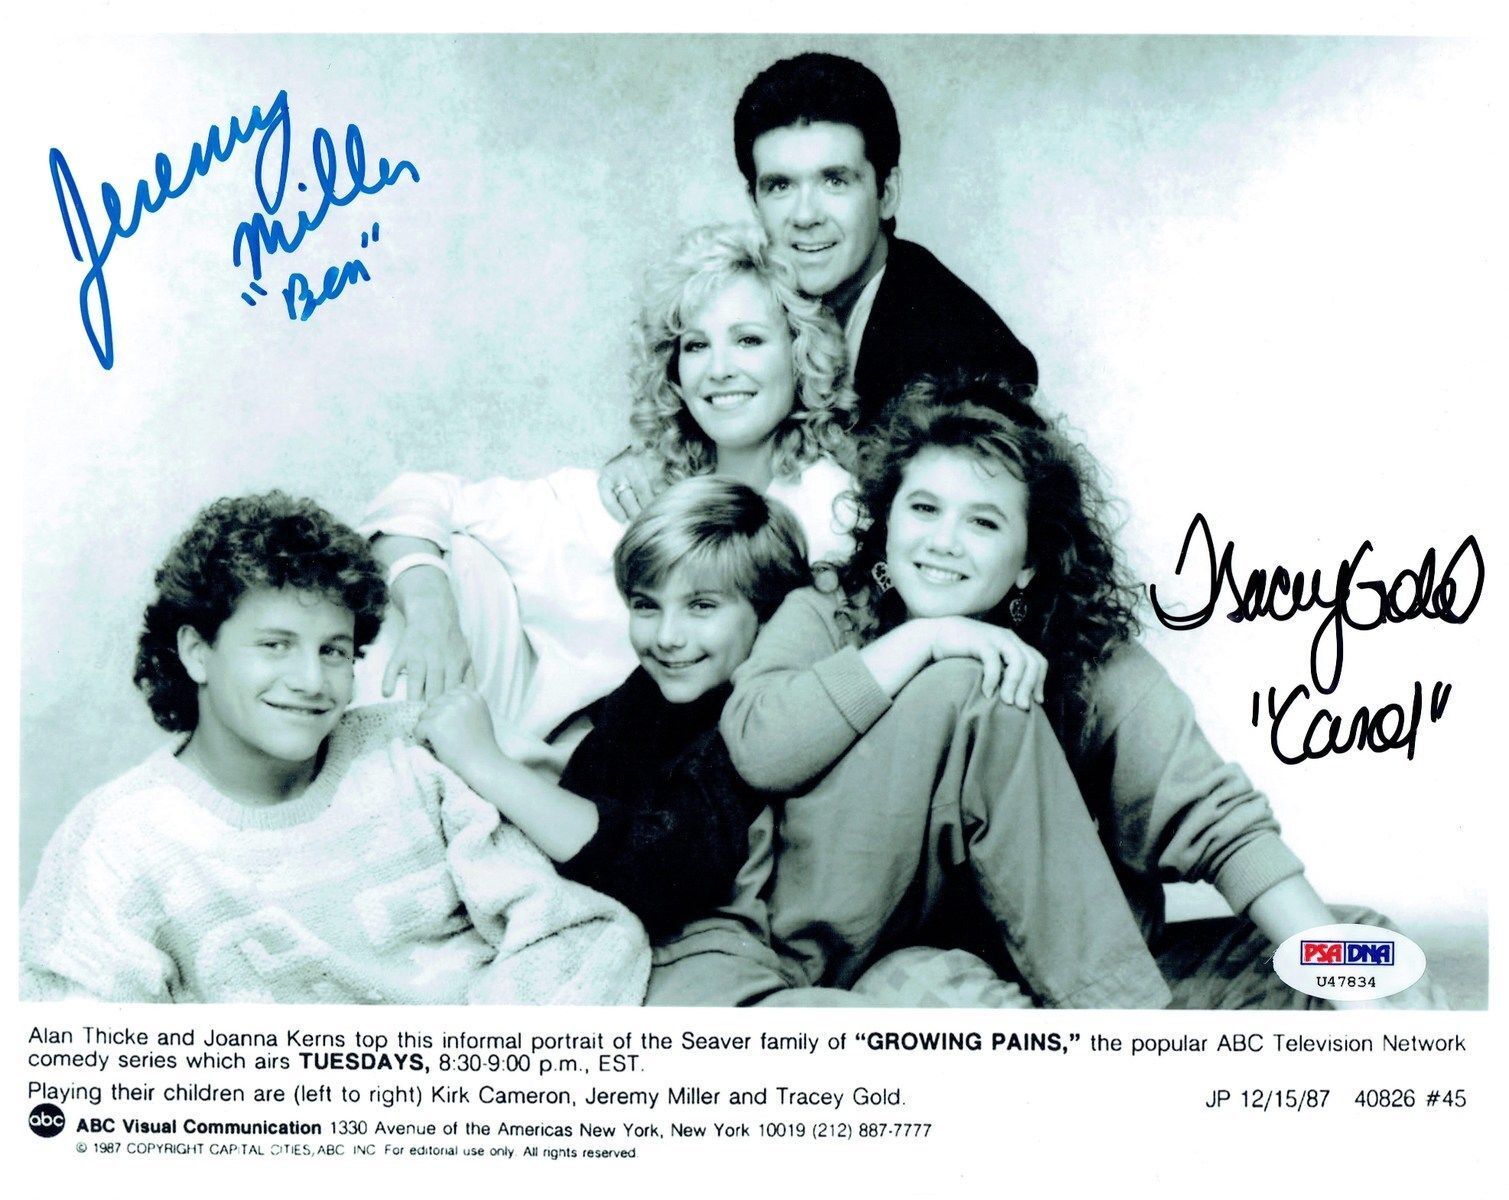 Tracey Gold/Jeremy Miller Signed Growing Pains Auto 8x10 B/W Photo Poster painting PSA #U47834